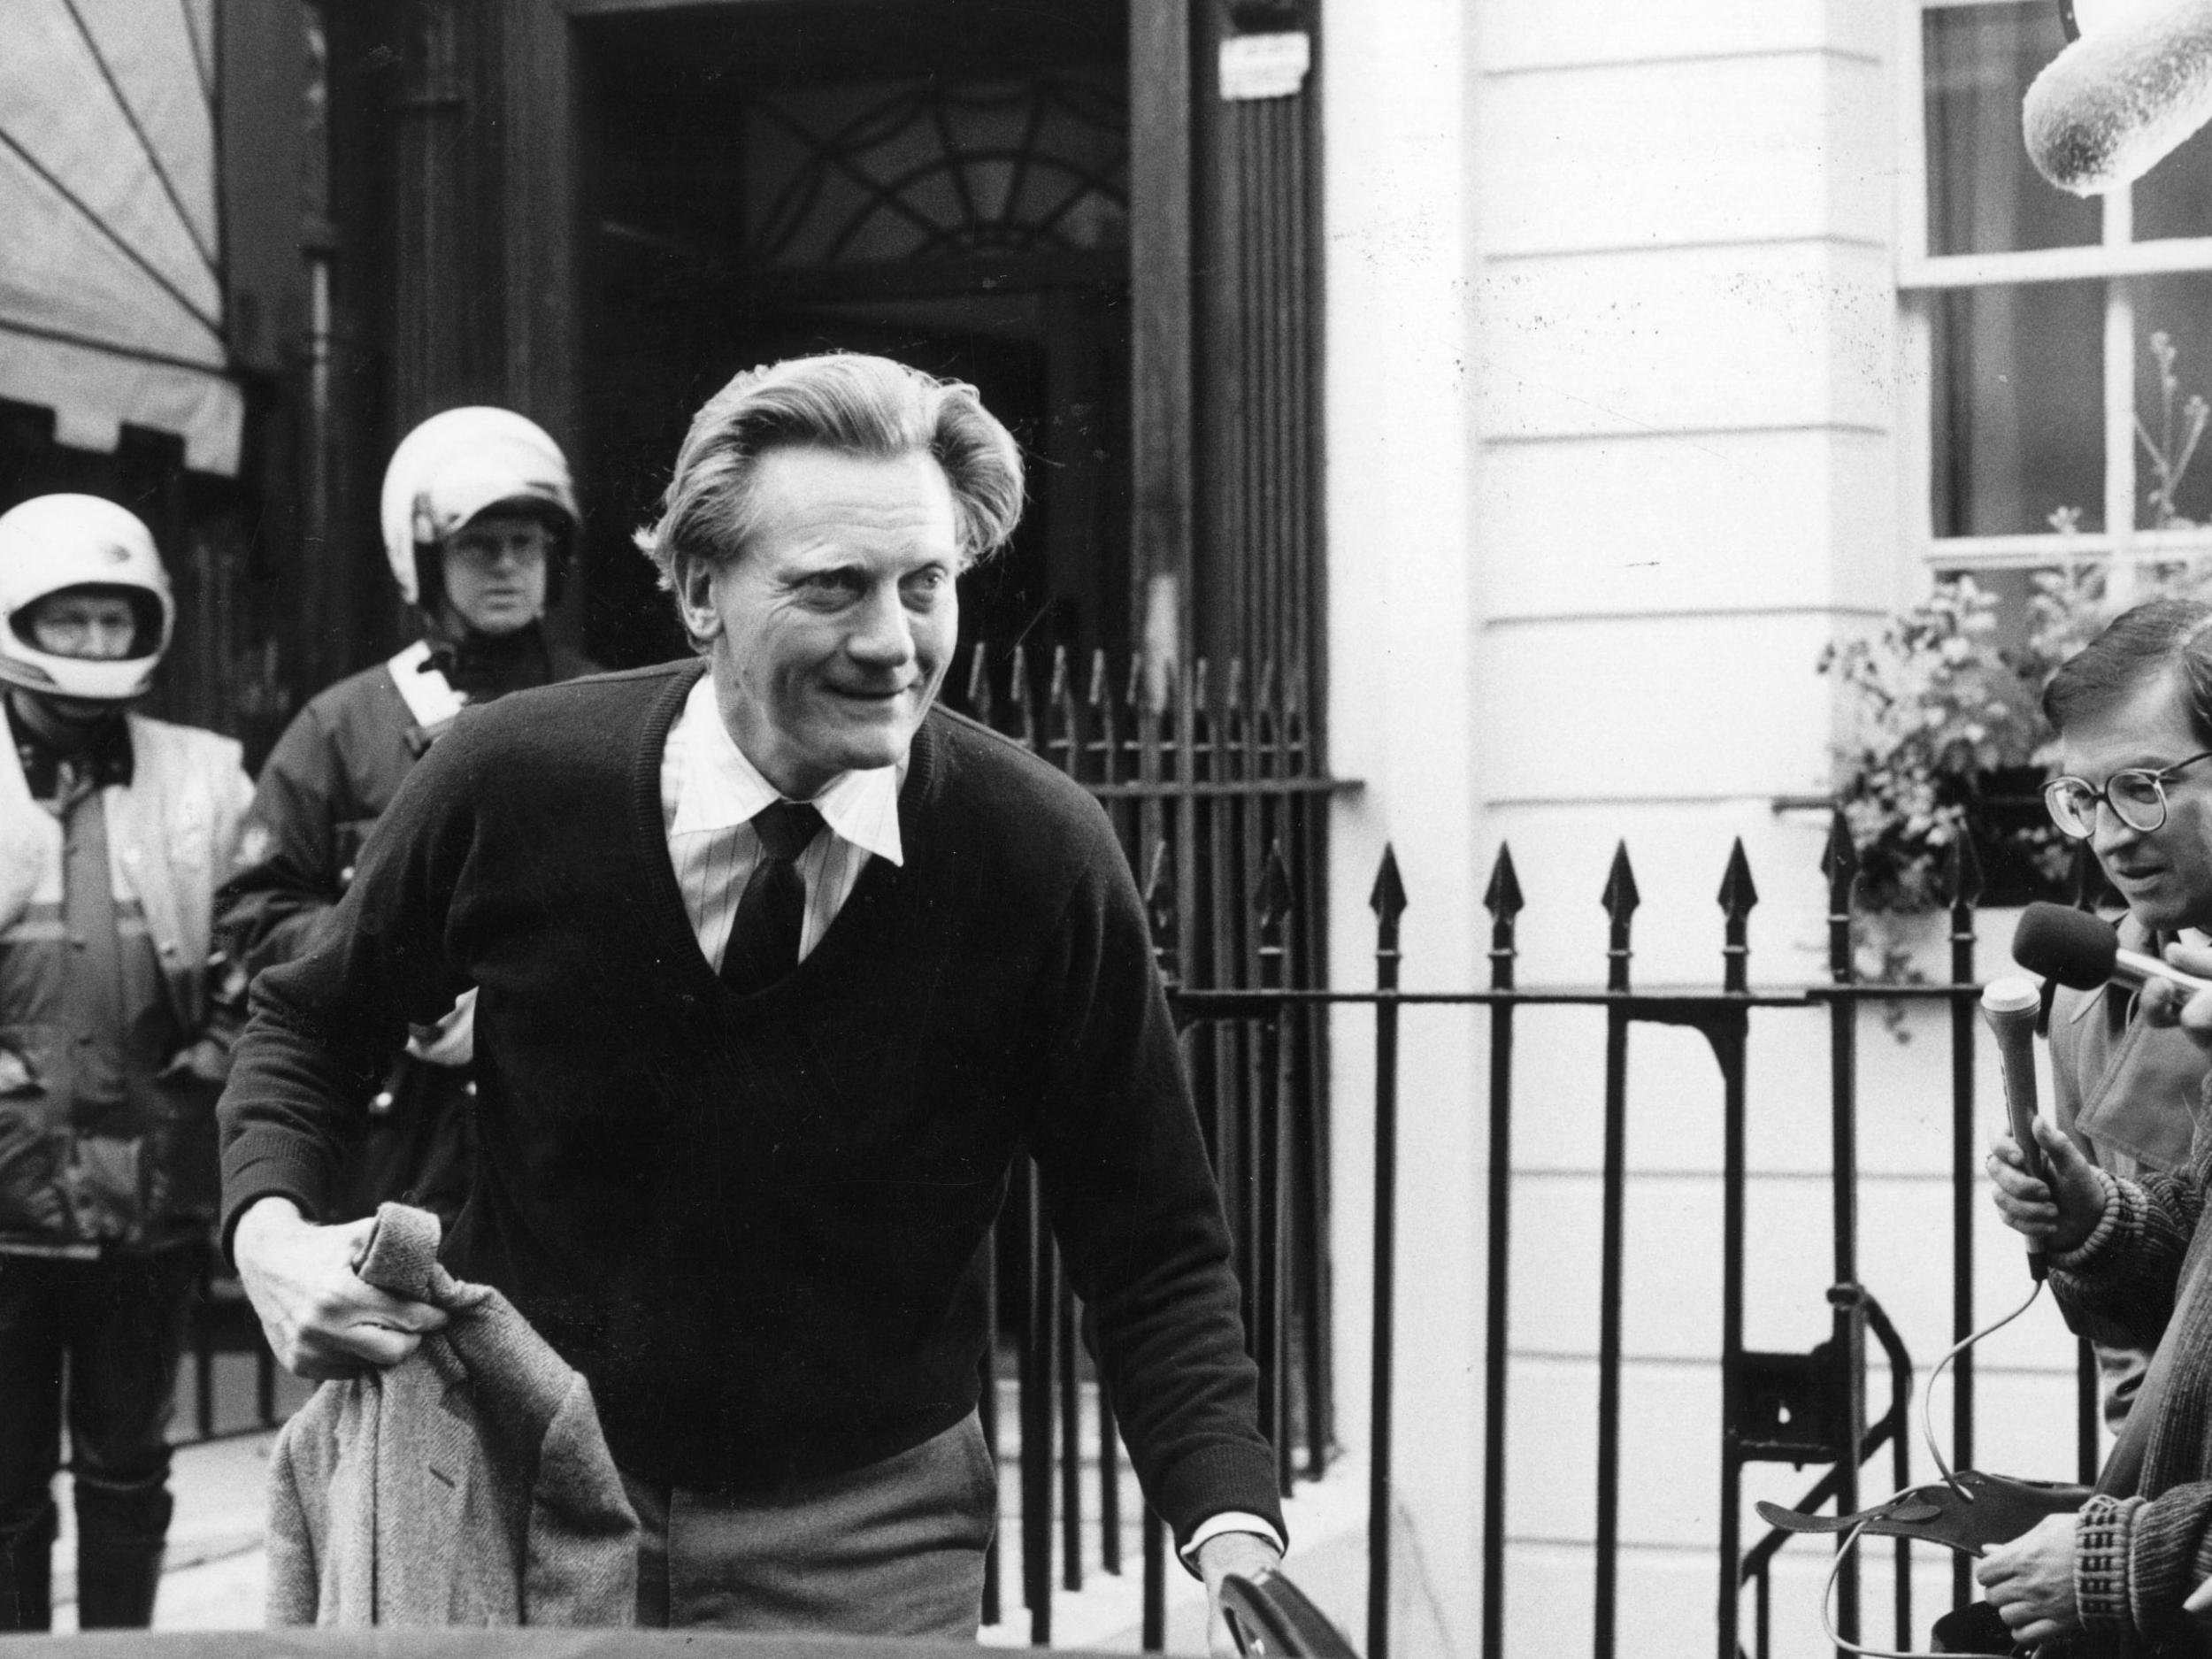 Michael Heseltine quit the cabinet over the Westland helicopter bid in 1986